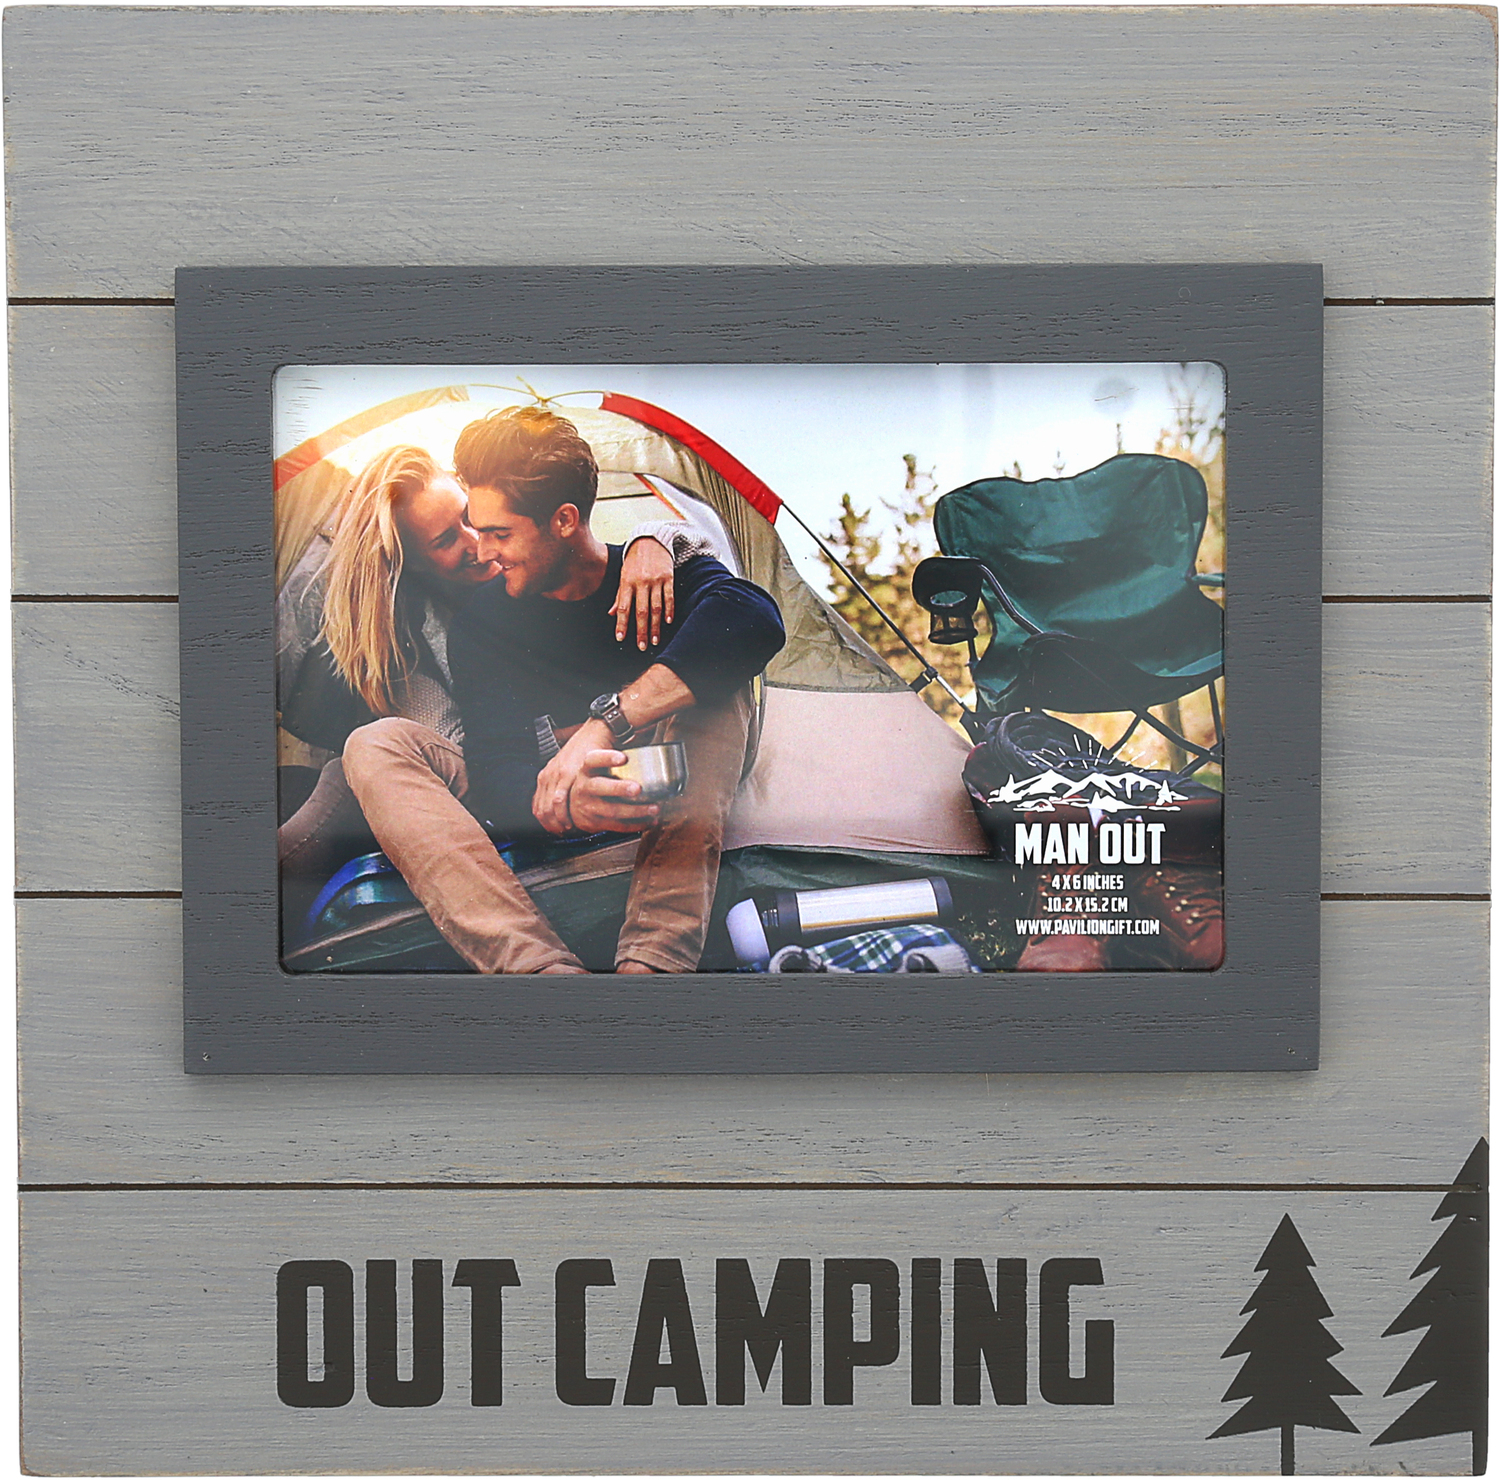 Camping by Man Out - Camping - 8.75" Frame
(Holds 6" x 4" Photo)